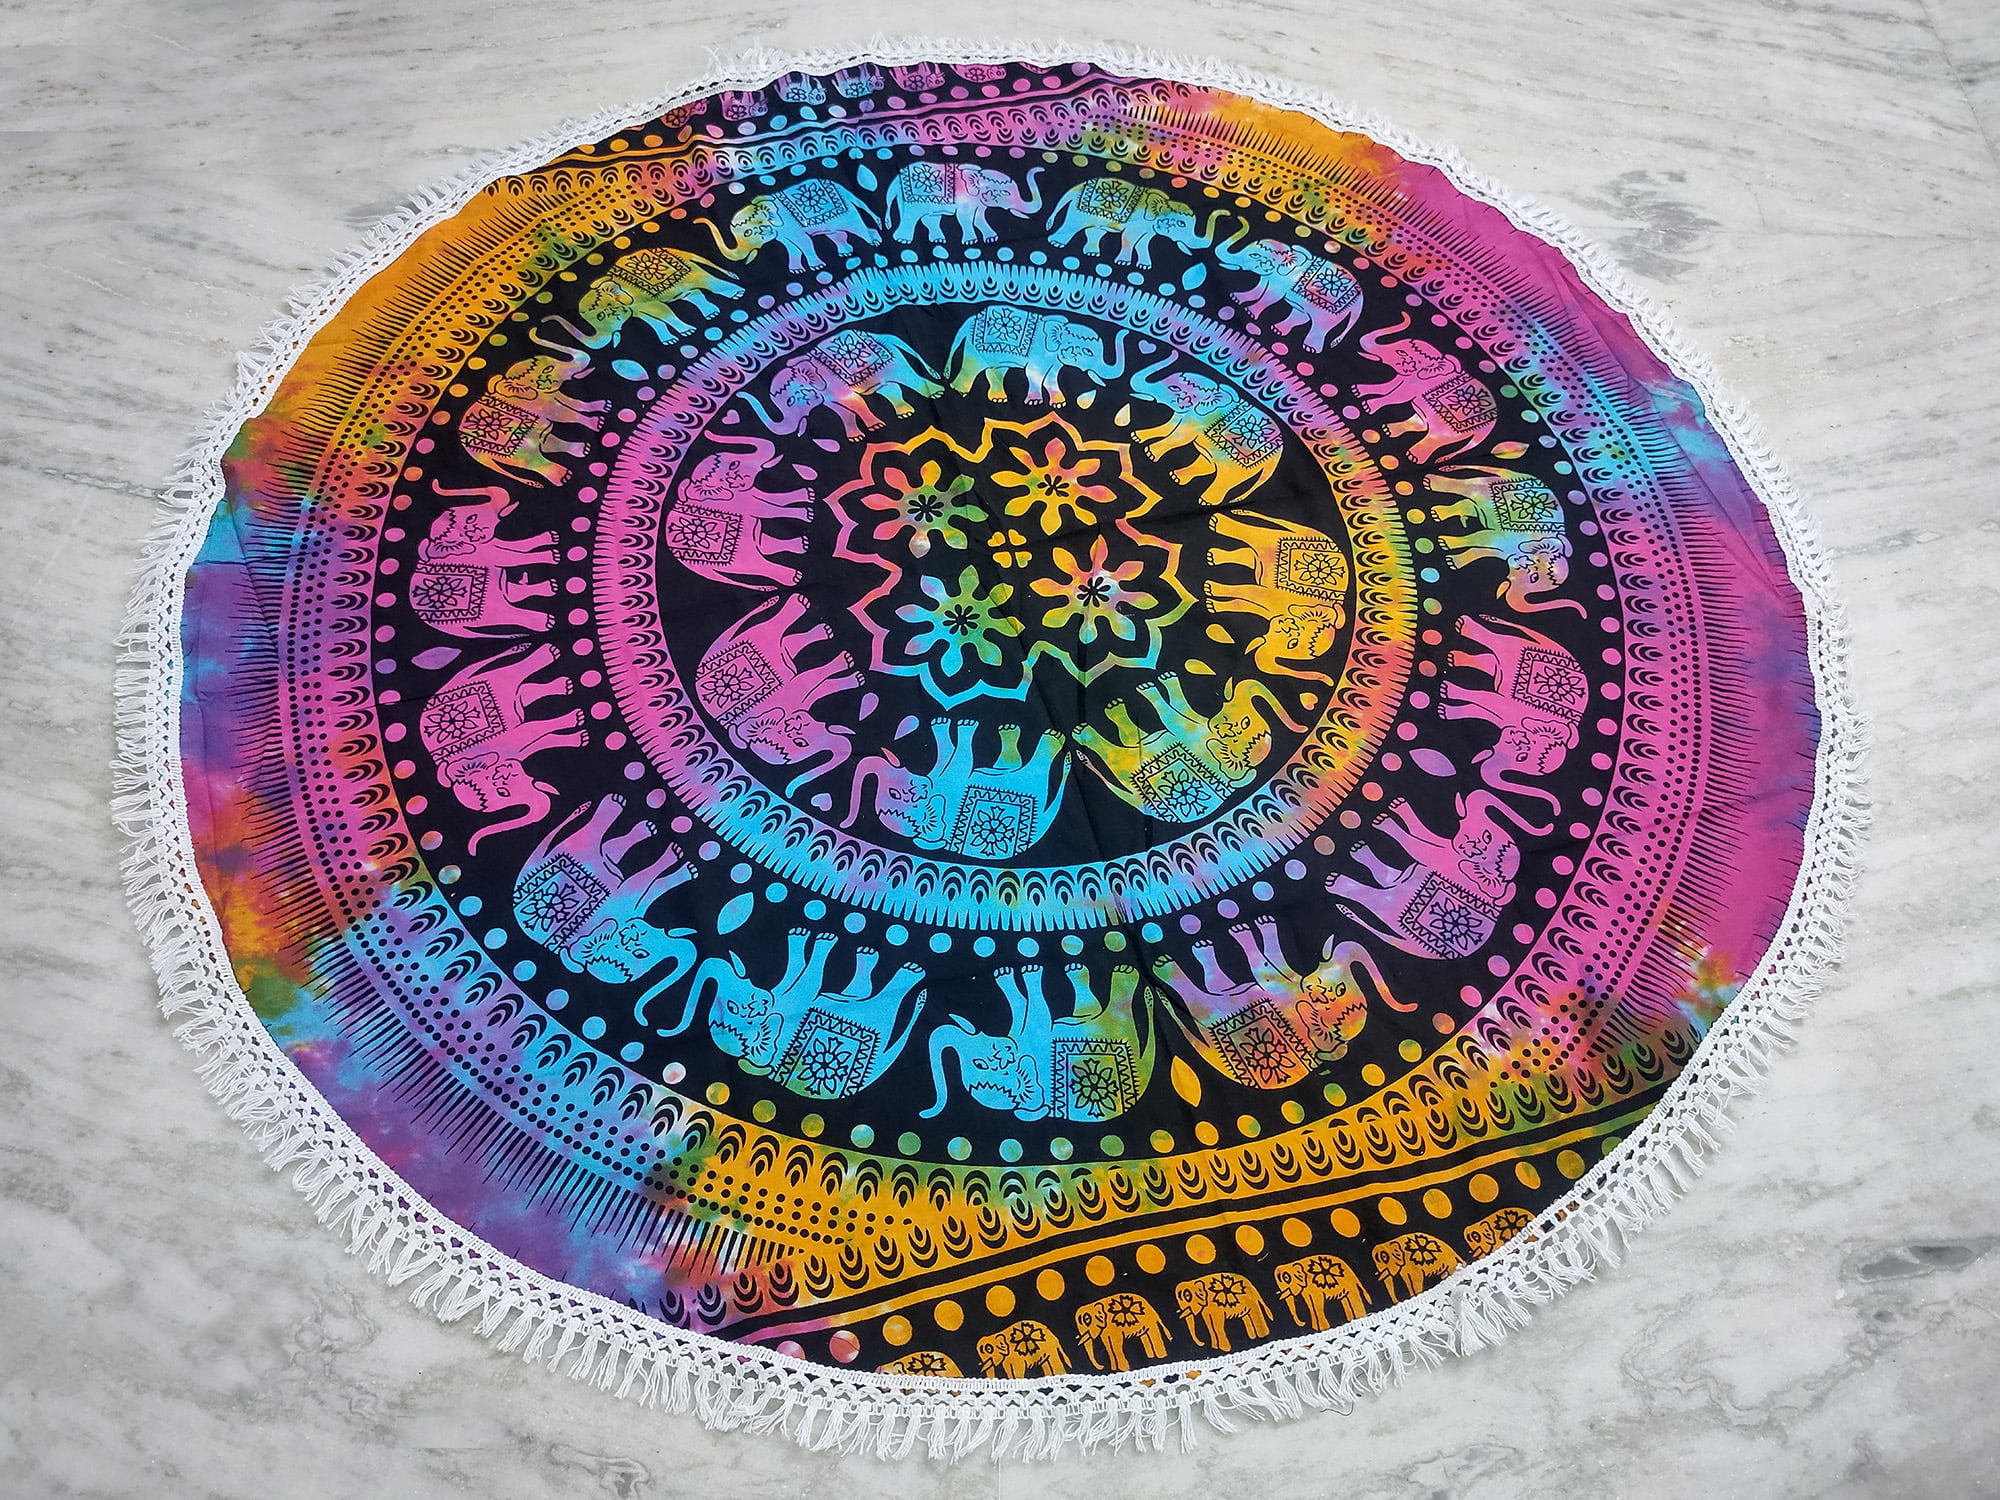 Indian Mandala Round Beach Tapestry Boho Cotton Table Cloth Black and White  Hippie Bohemian Yoga Mat Roundie Meditation Picnic Rugs - 42 Inches 